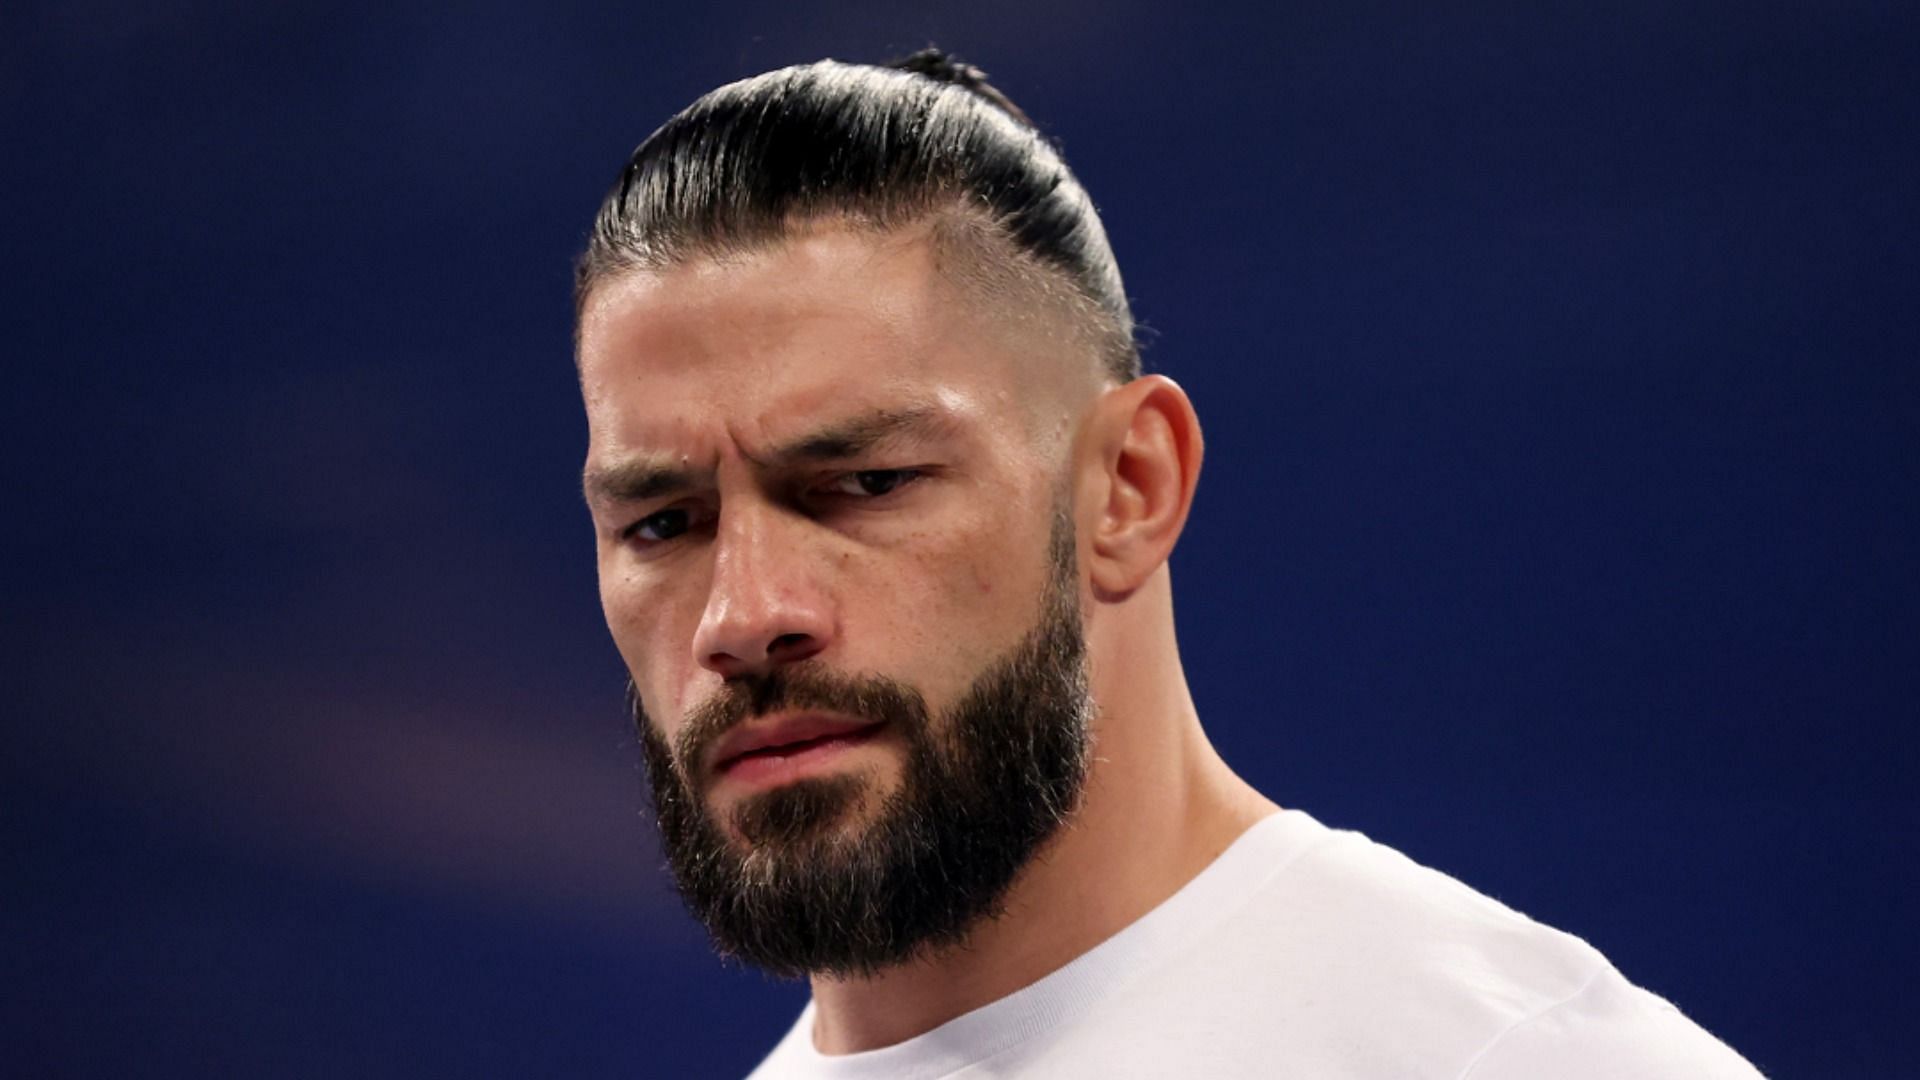 Roman Reigns has main-evented WrestleMania five times